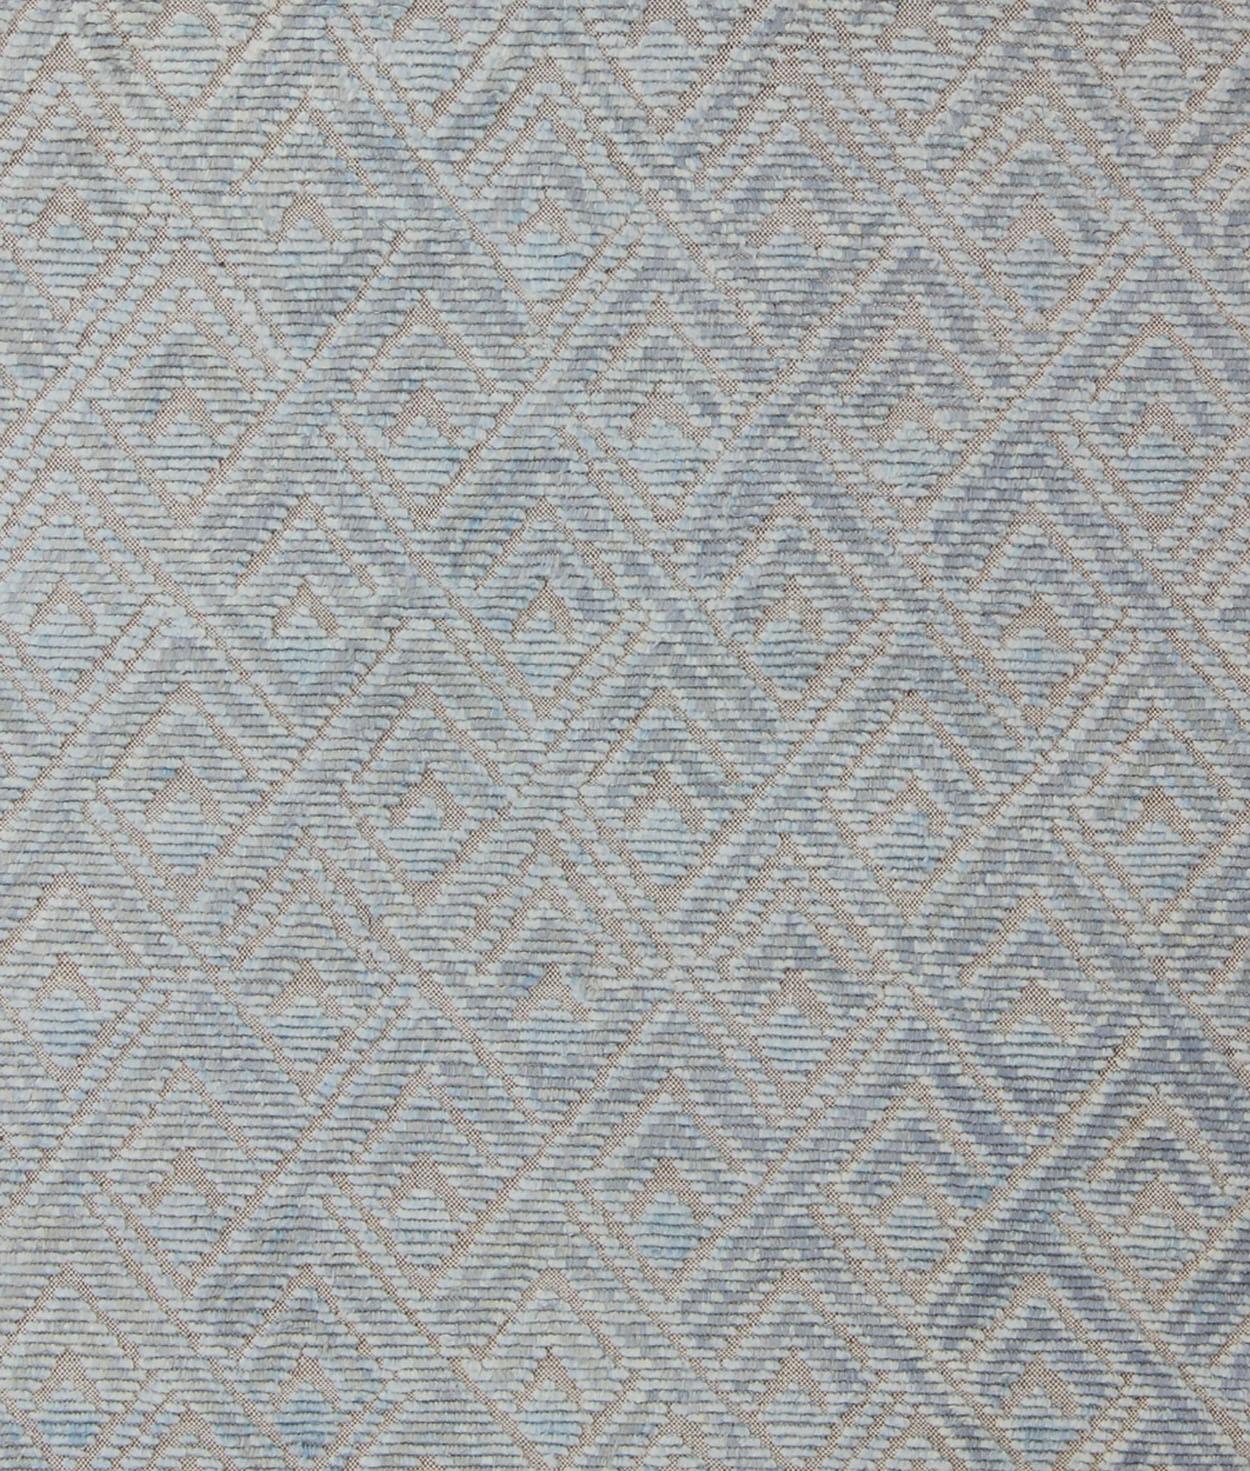 Keivan Woven Arts Hi-Low pile in Moroccan Design with  Light Blue  In Excellent Condition For Sale In Atlanta, GA